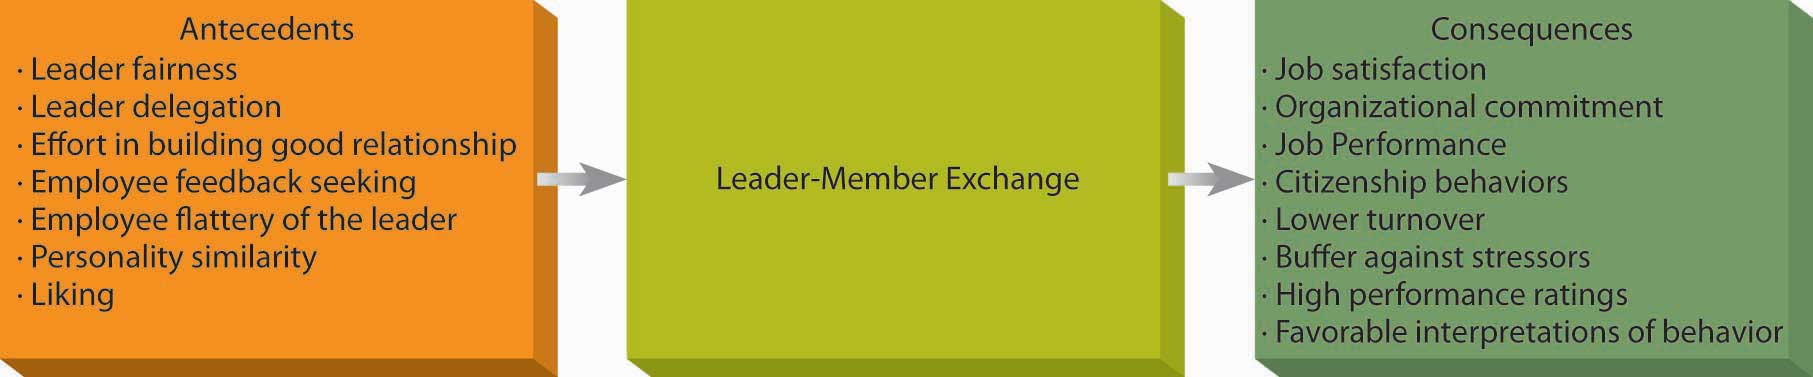 Antecedents and Consequences of Leader Member Exchange